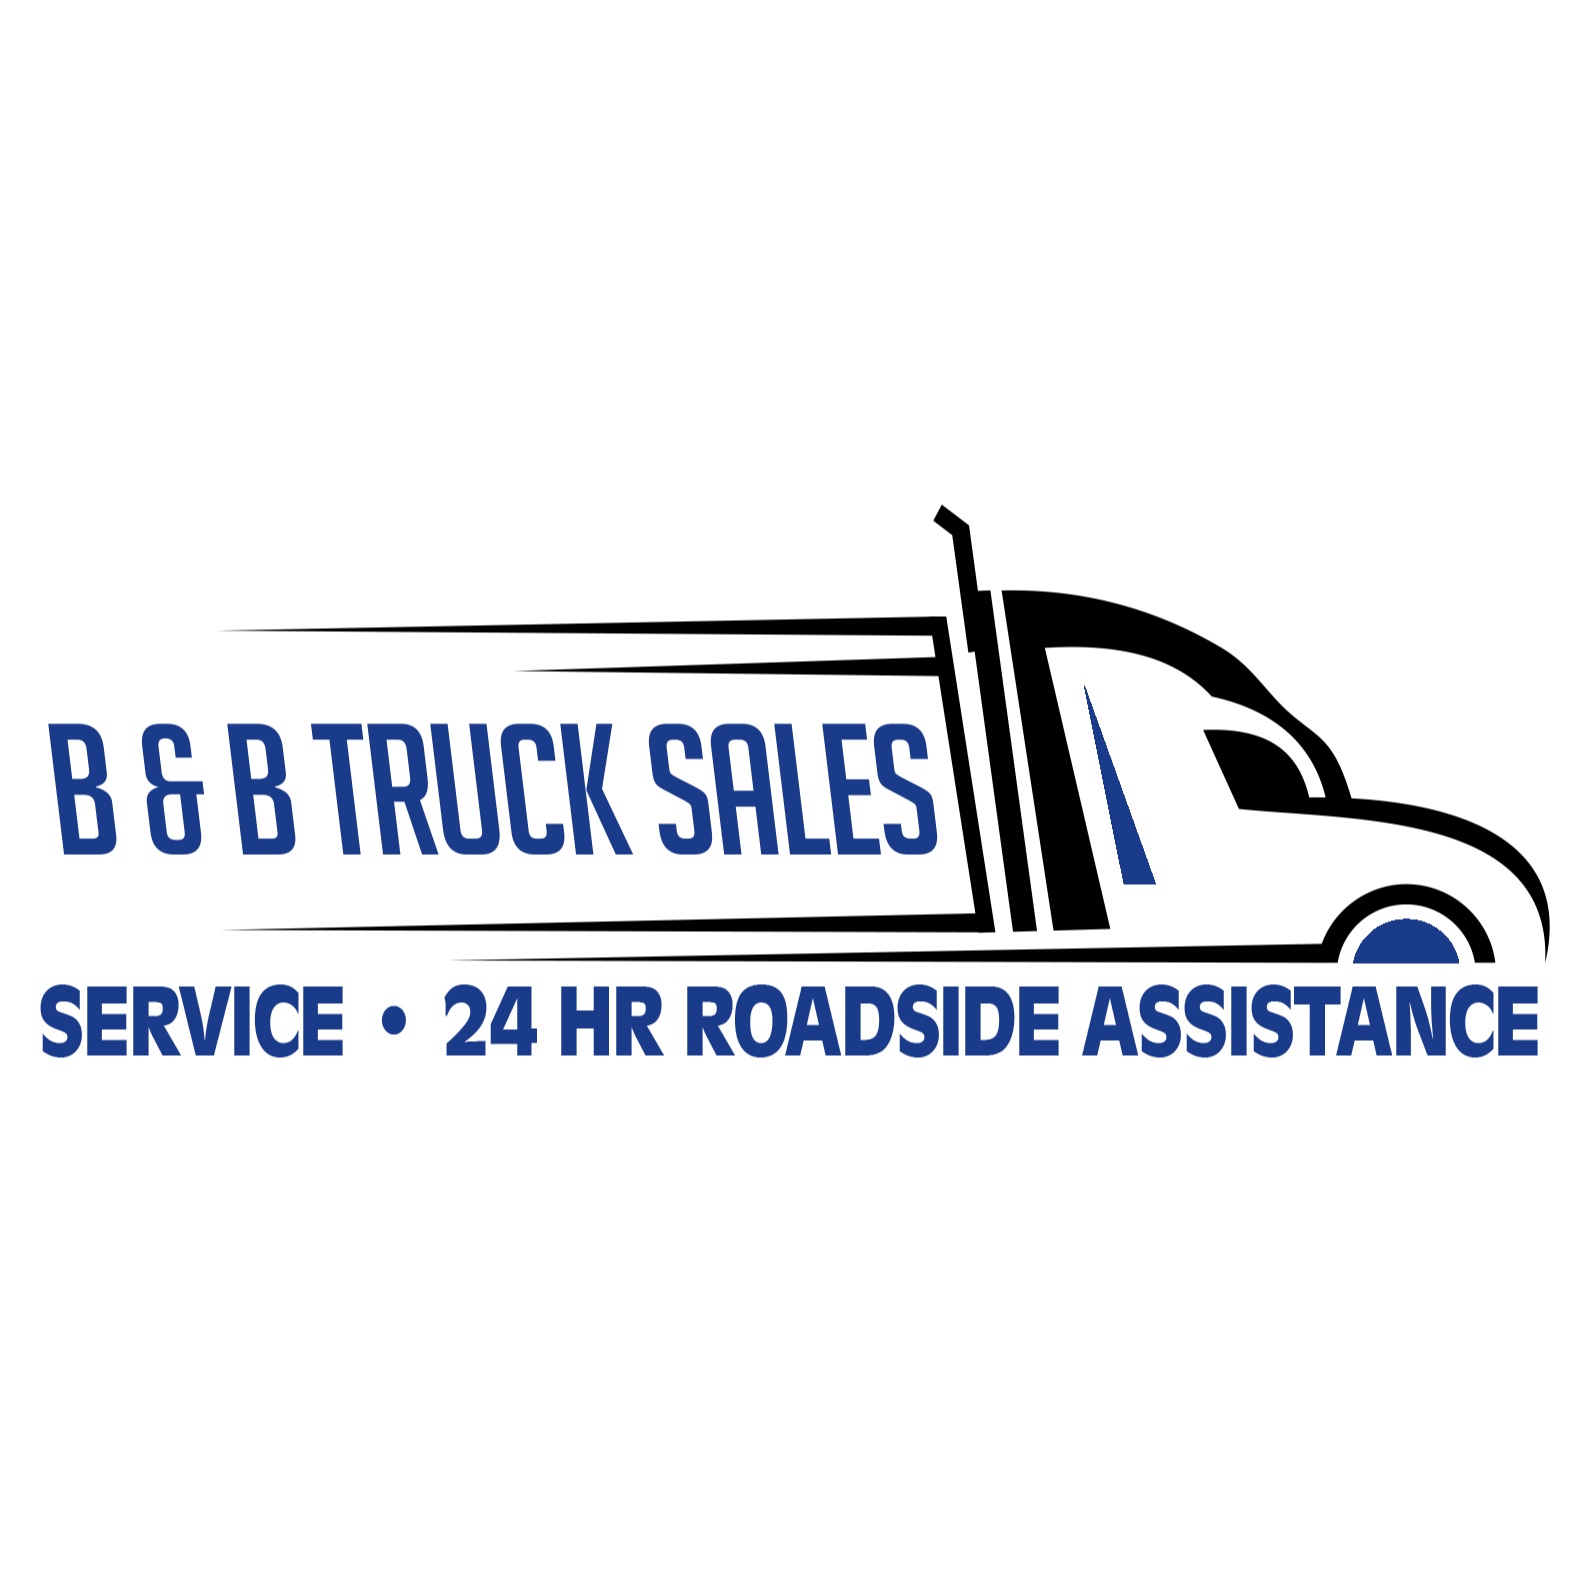 B & B Truck Sales and Service